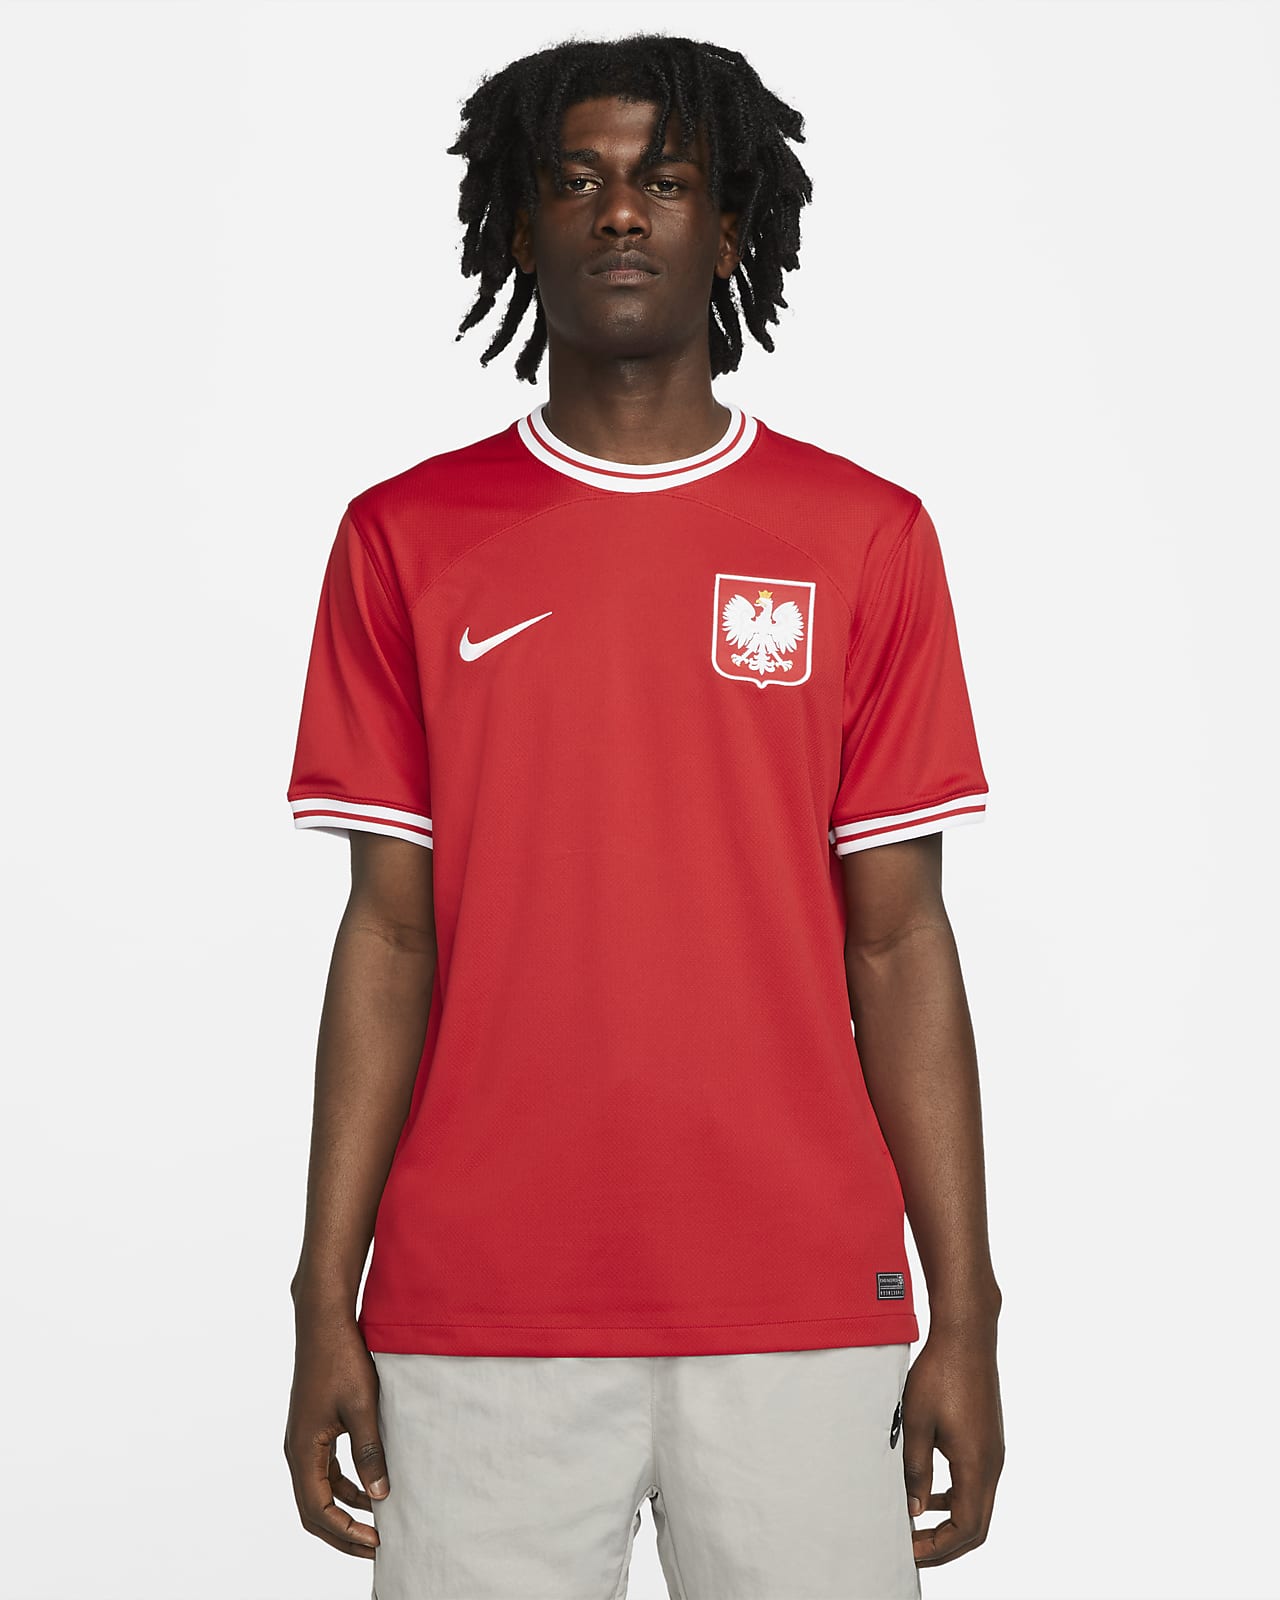 Nike Football World Cup 2022 Poland unisex home jersey in white